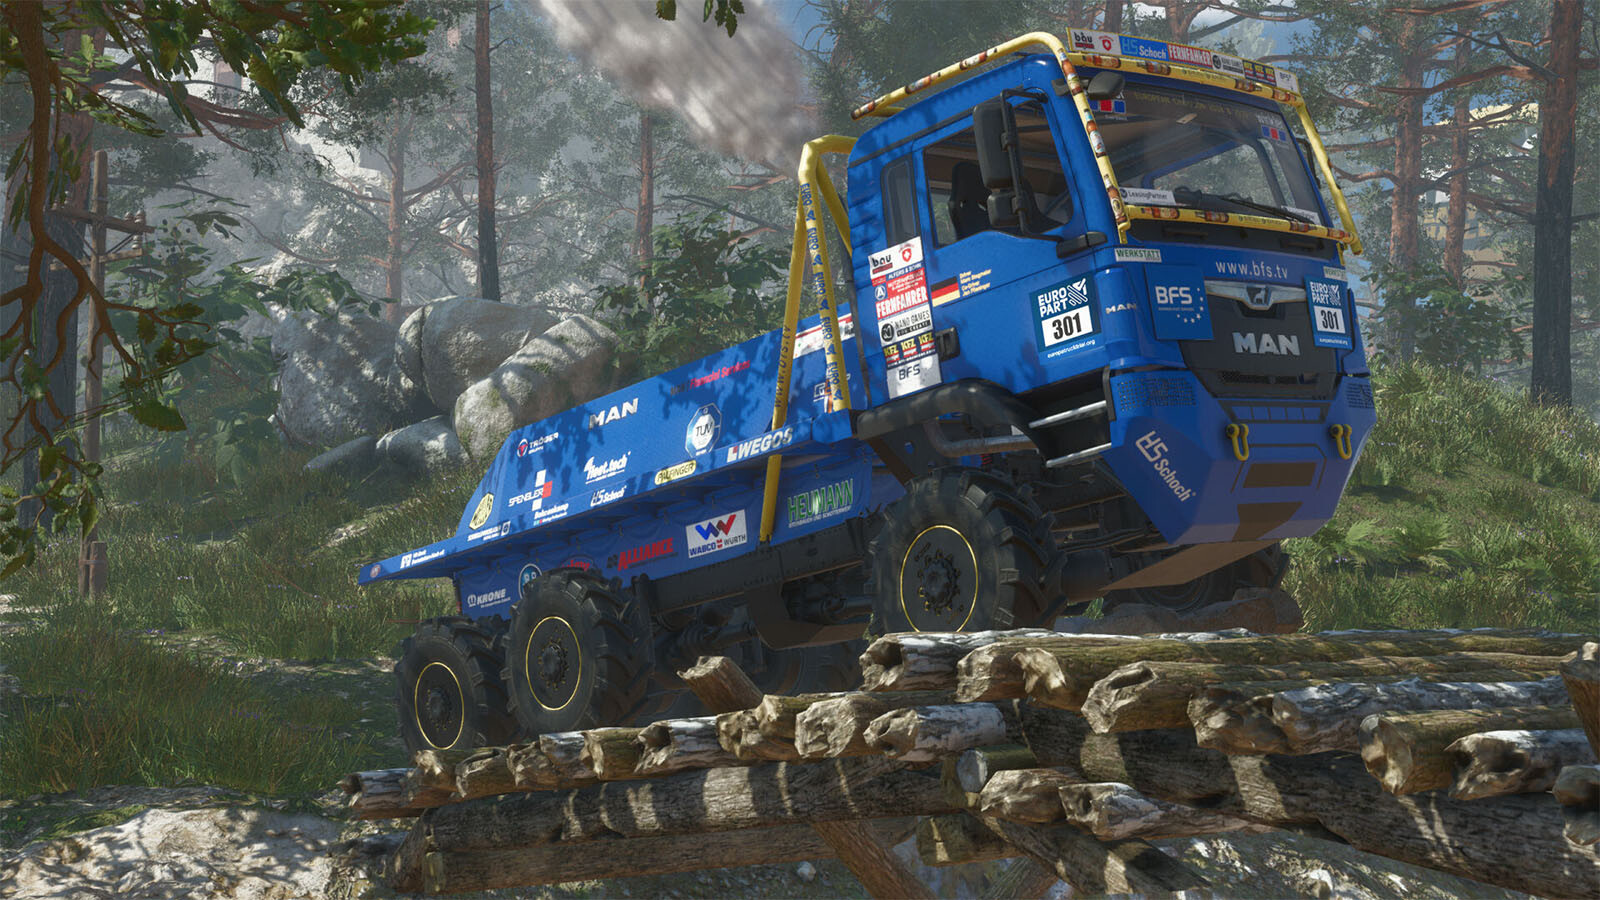 Heavy Duty Challenge®: The Off-Road Truck Simulator Steam Key for PC - Buy  now